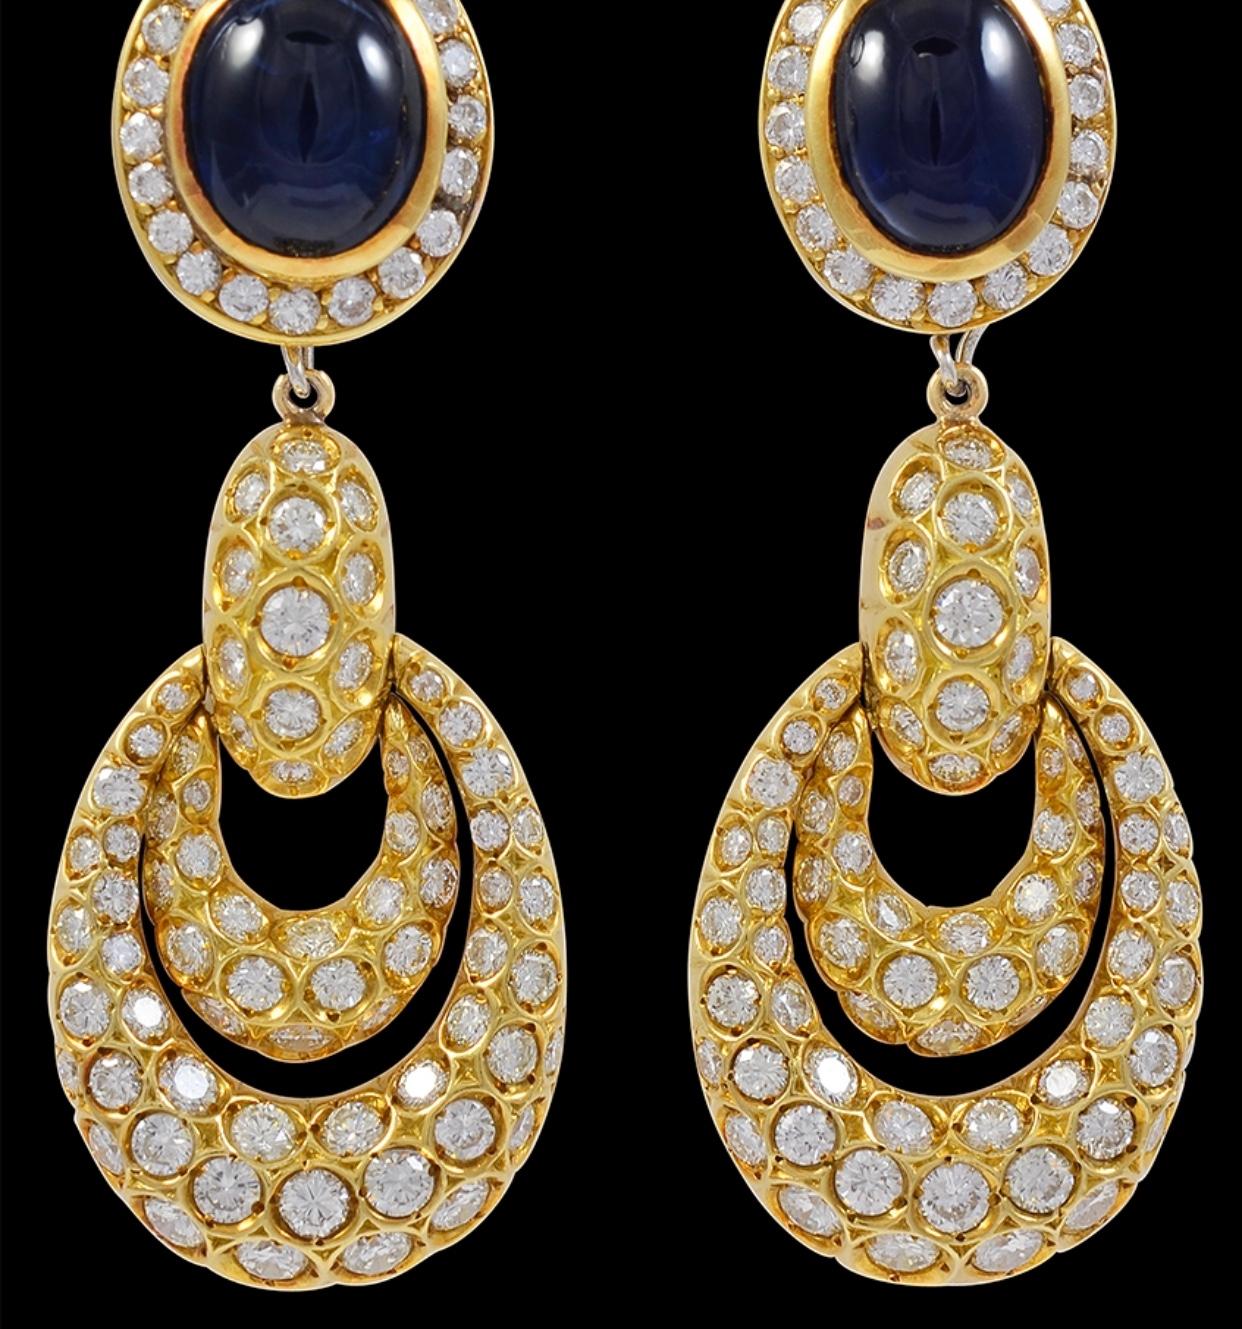 15 Carat Blue Sapphire and Diamond Hanging /Cocktail/Drop Earring 18 Karat Gold For Sale 1